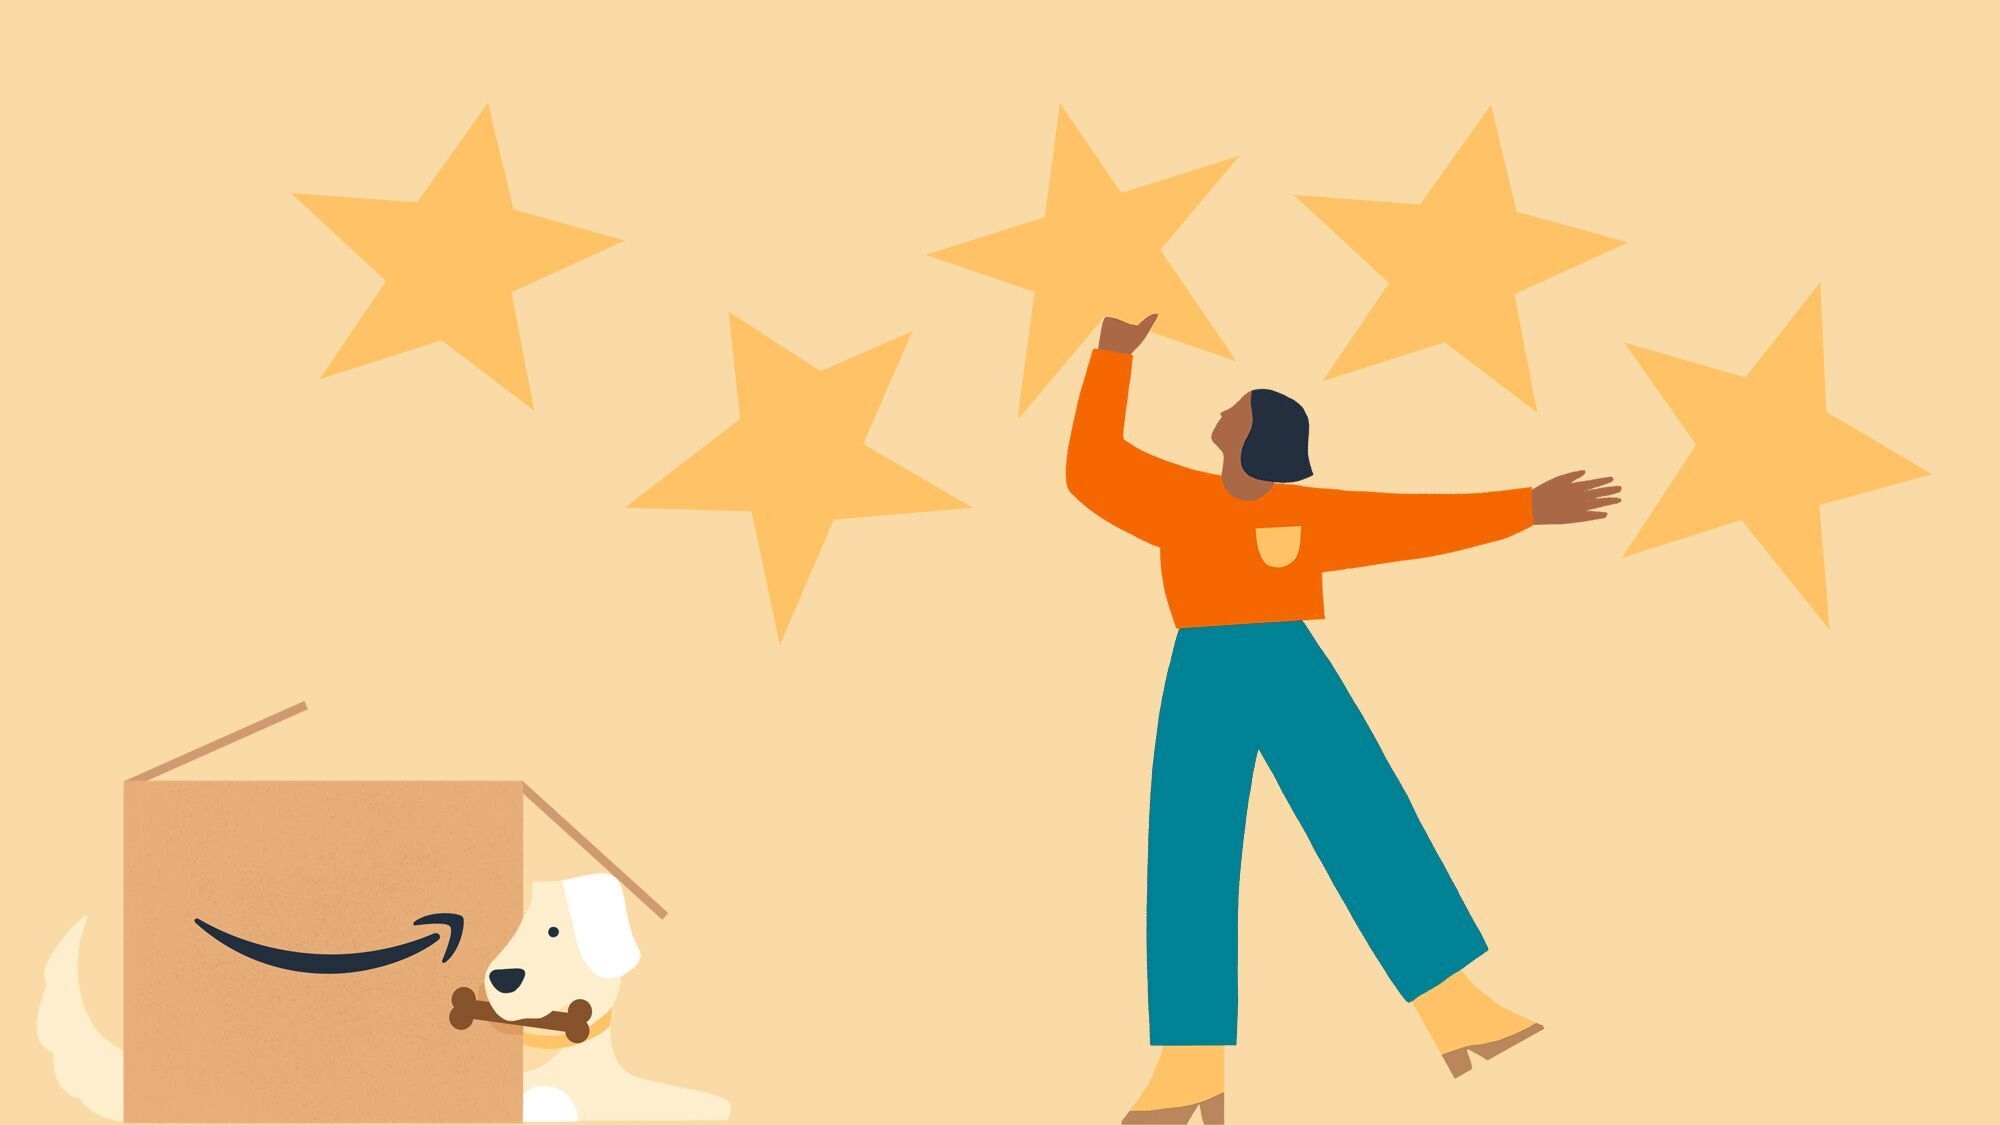 A graphic of a person reaching up for the stars above. A dog plays behind an Amazon box.